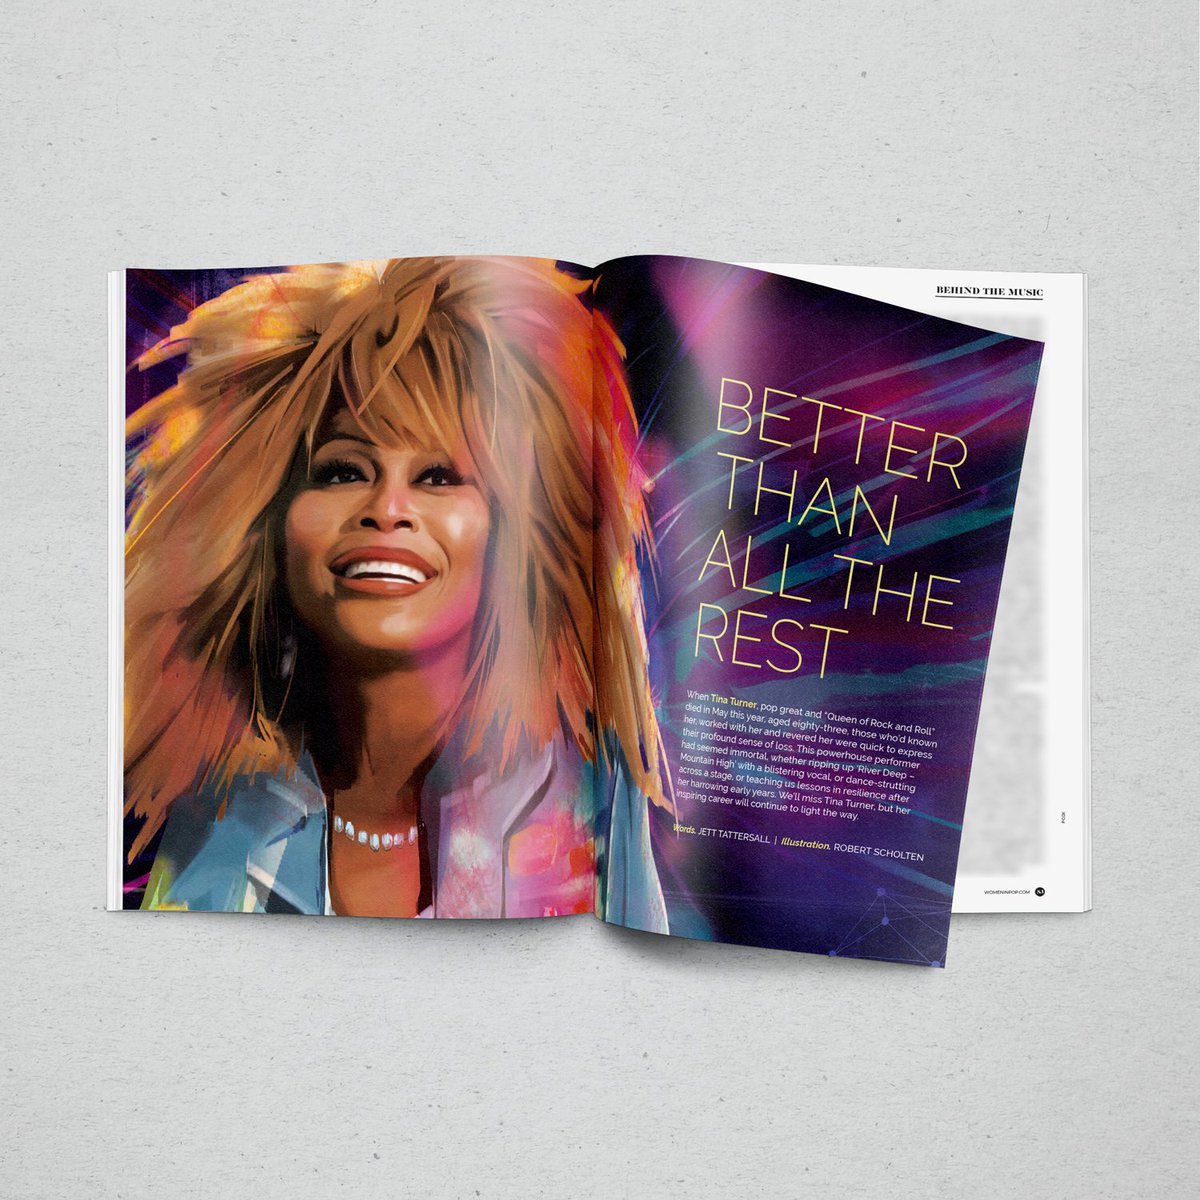 Issue 15 of Women In Pop magazine is out now & inside we celebrate the life & music of the icon Tina Turner Across 10 pages we explore her incredible career, powerful stage presence & how she forged a path for all the women that followed.Get your copy now: shorturl.at/bkq28